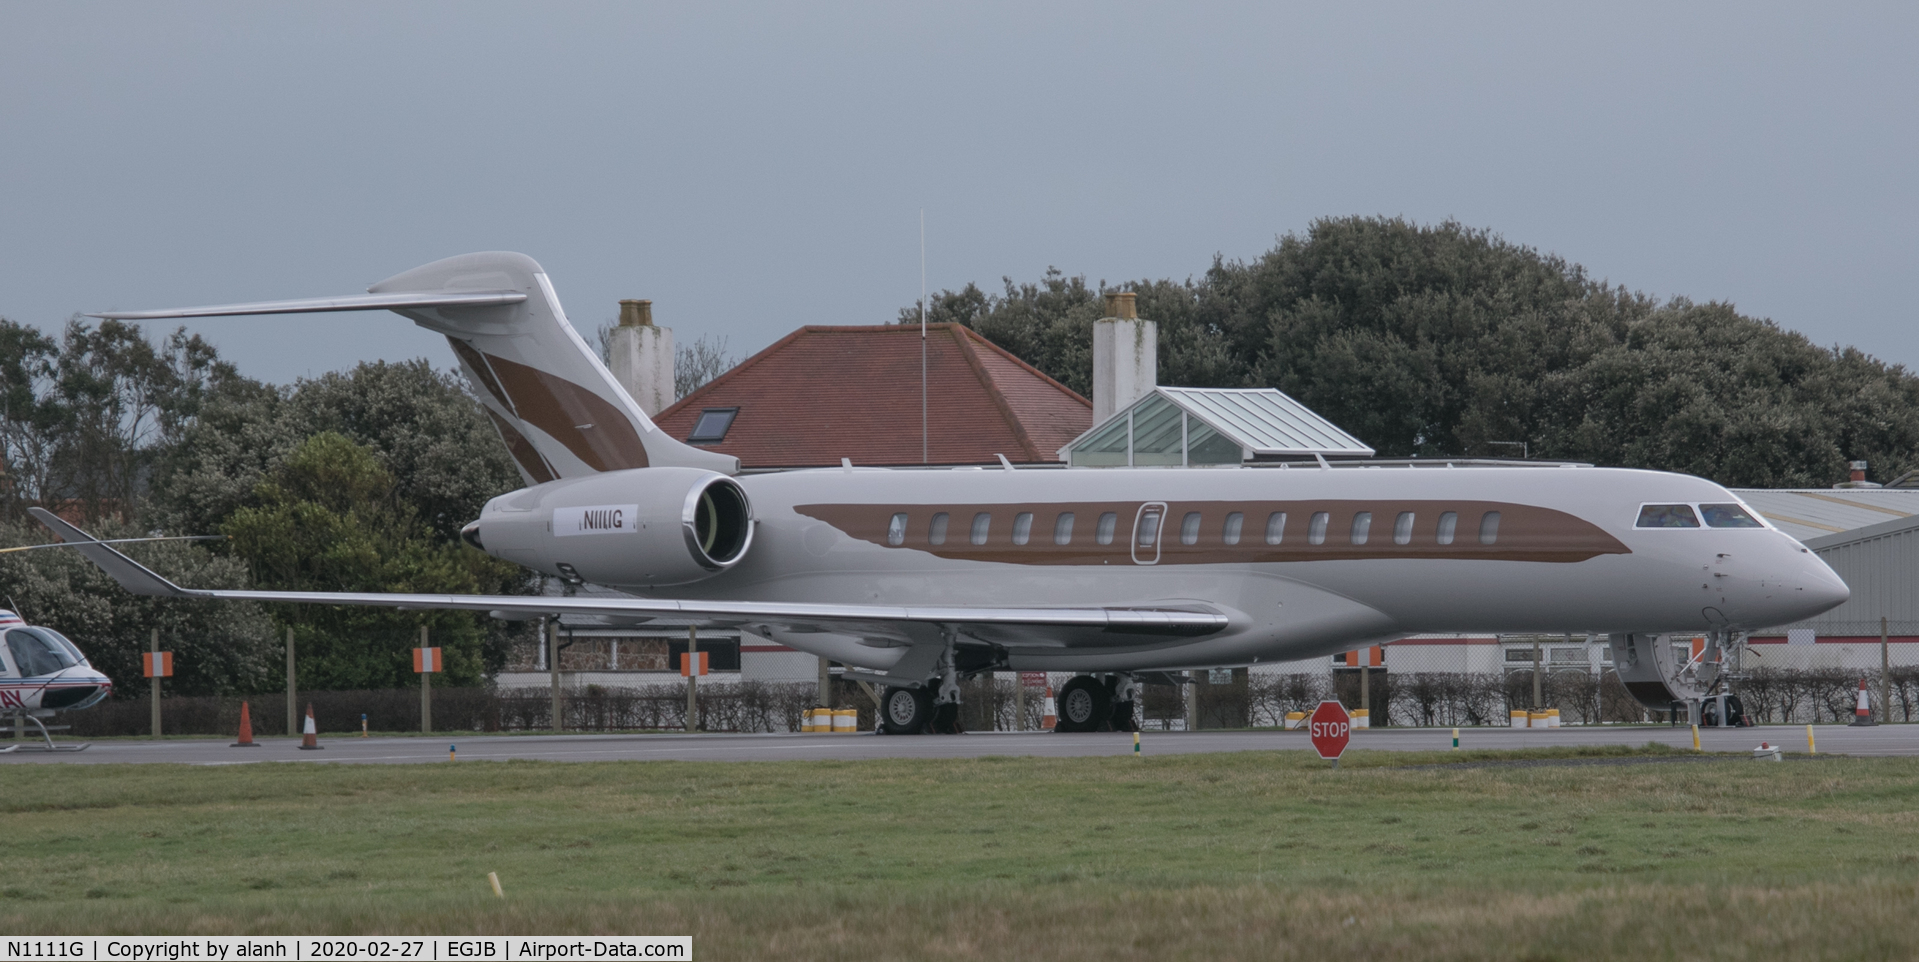 N1111G, 2018 Bombardier BD-700-2A12 Global 7500 C/N 70011, Wearing a taped-on registration at Guernsey, following a change from OE-IIL